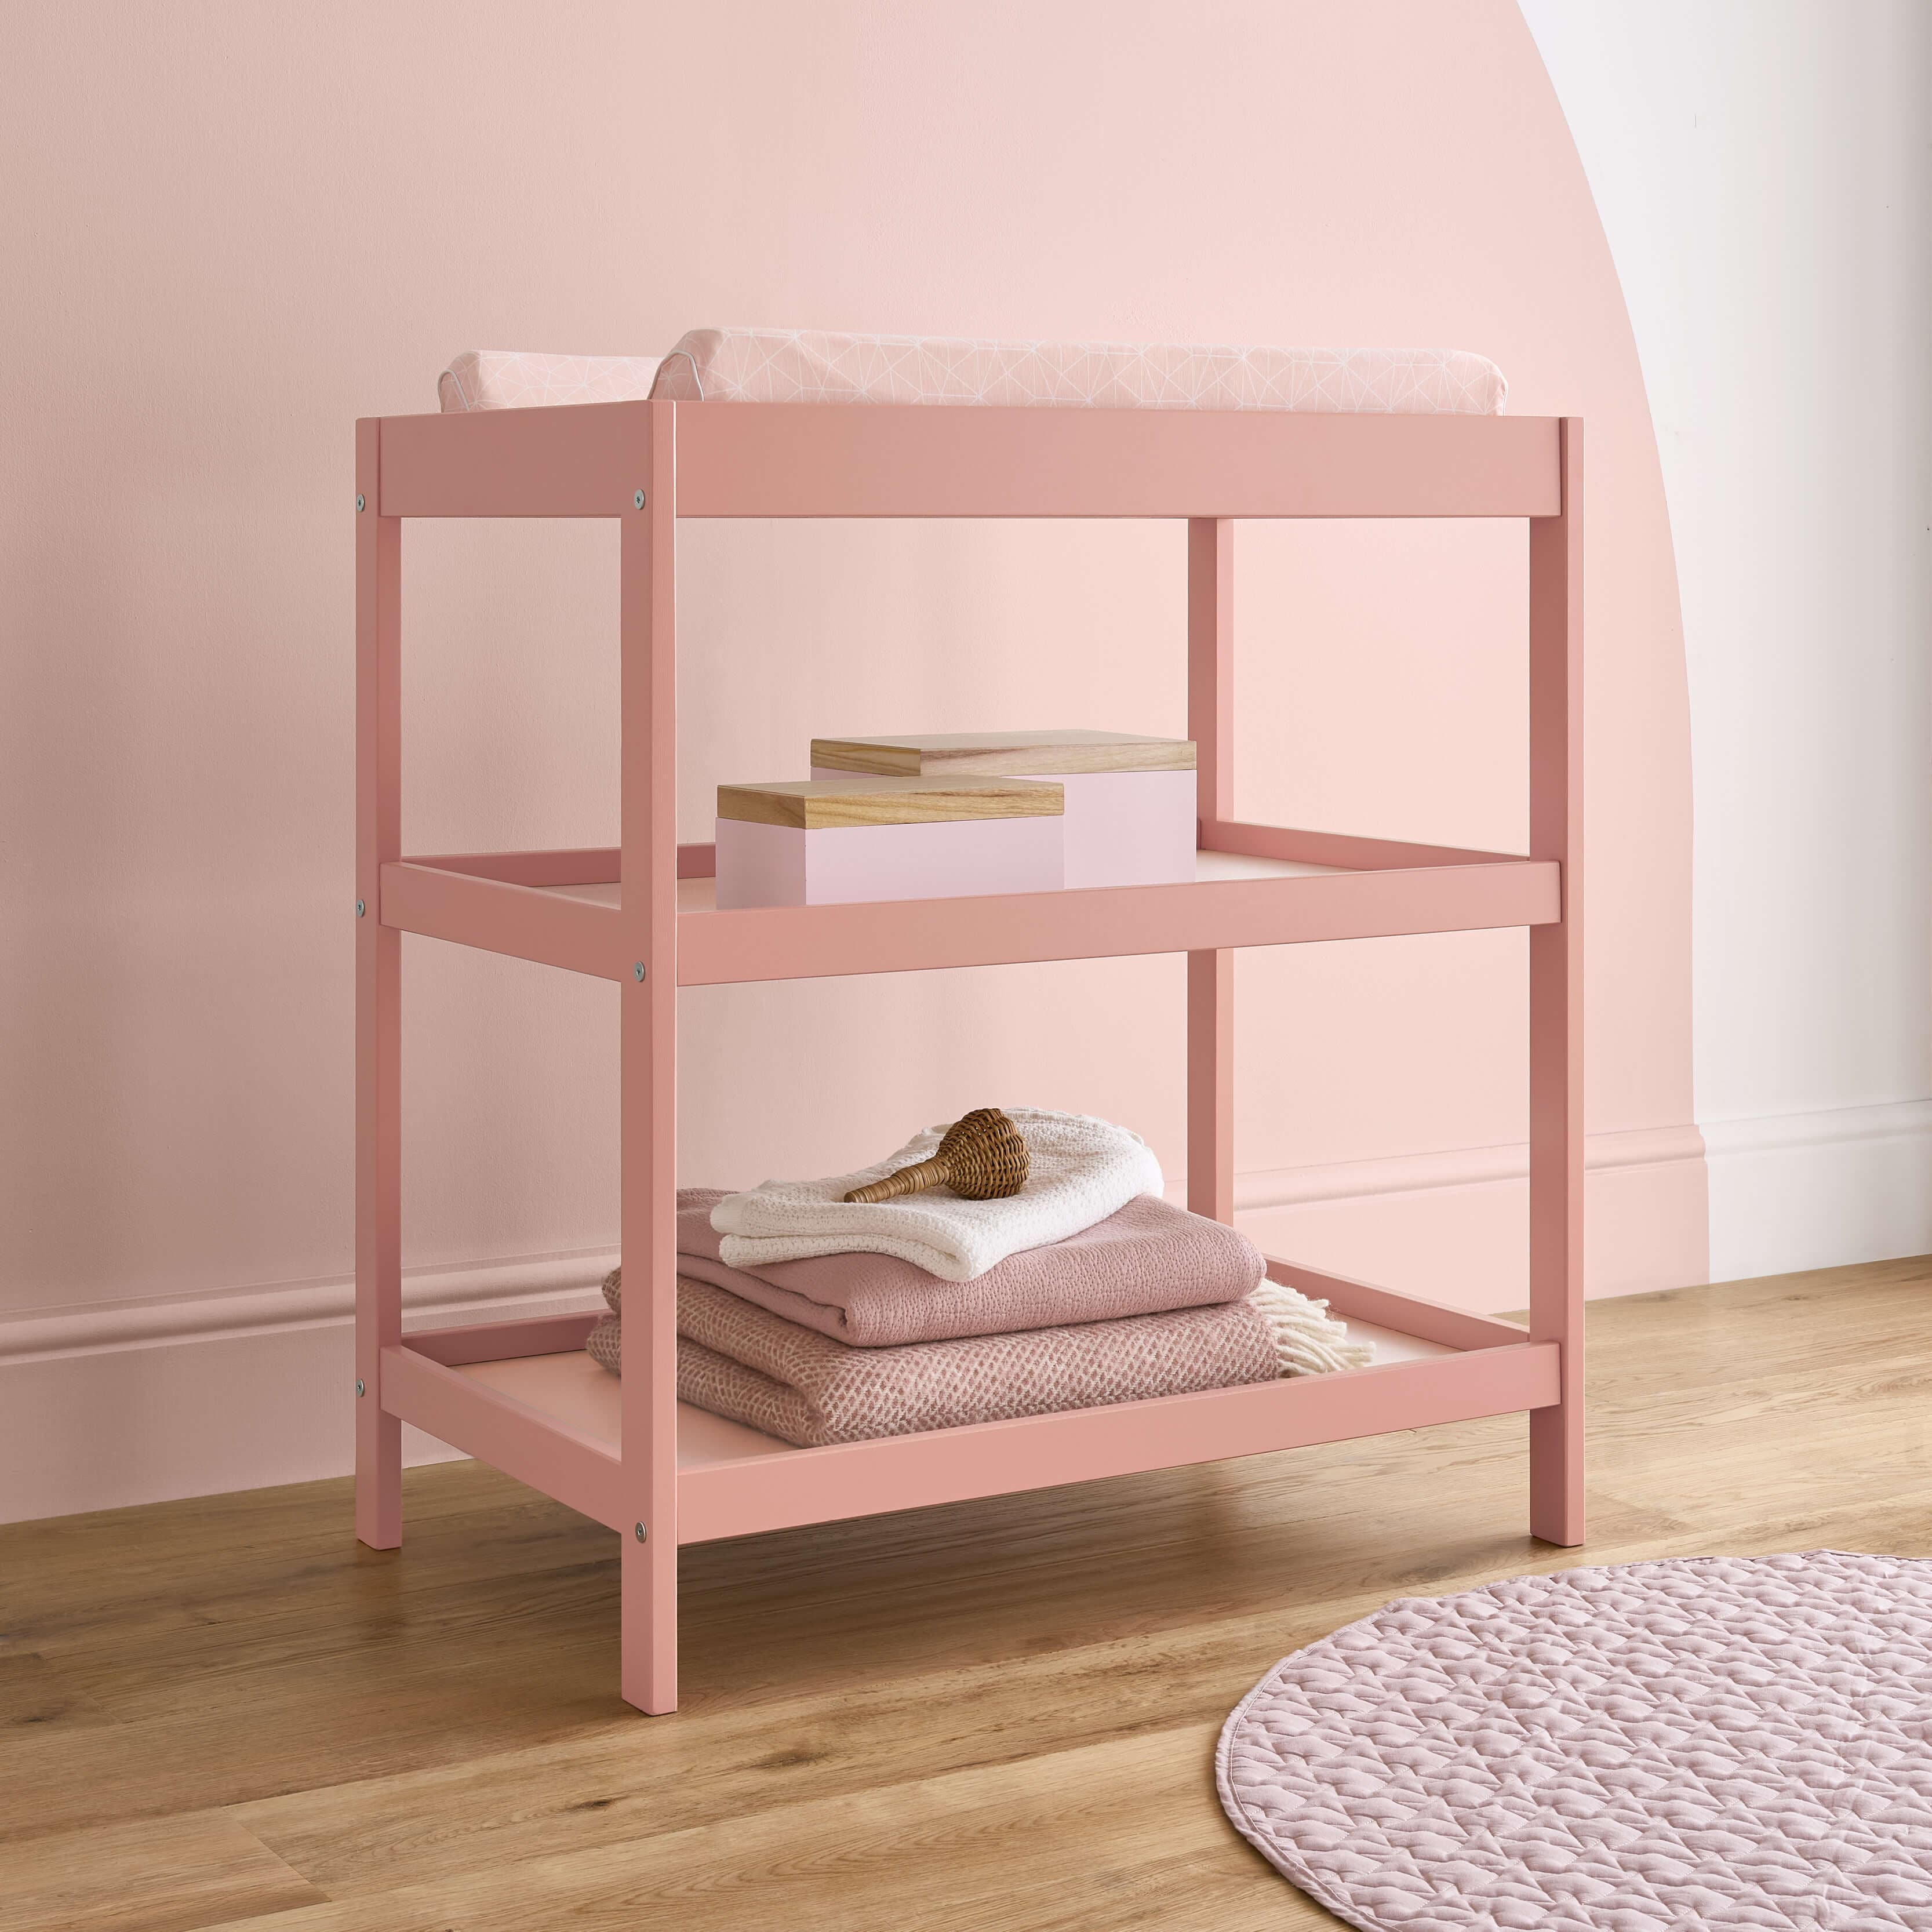 Cuddleco Nola 3 Piece Nursery Furniture Set - Blush Pink -  | For Your Little One